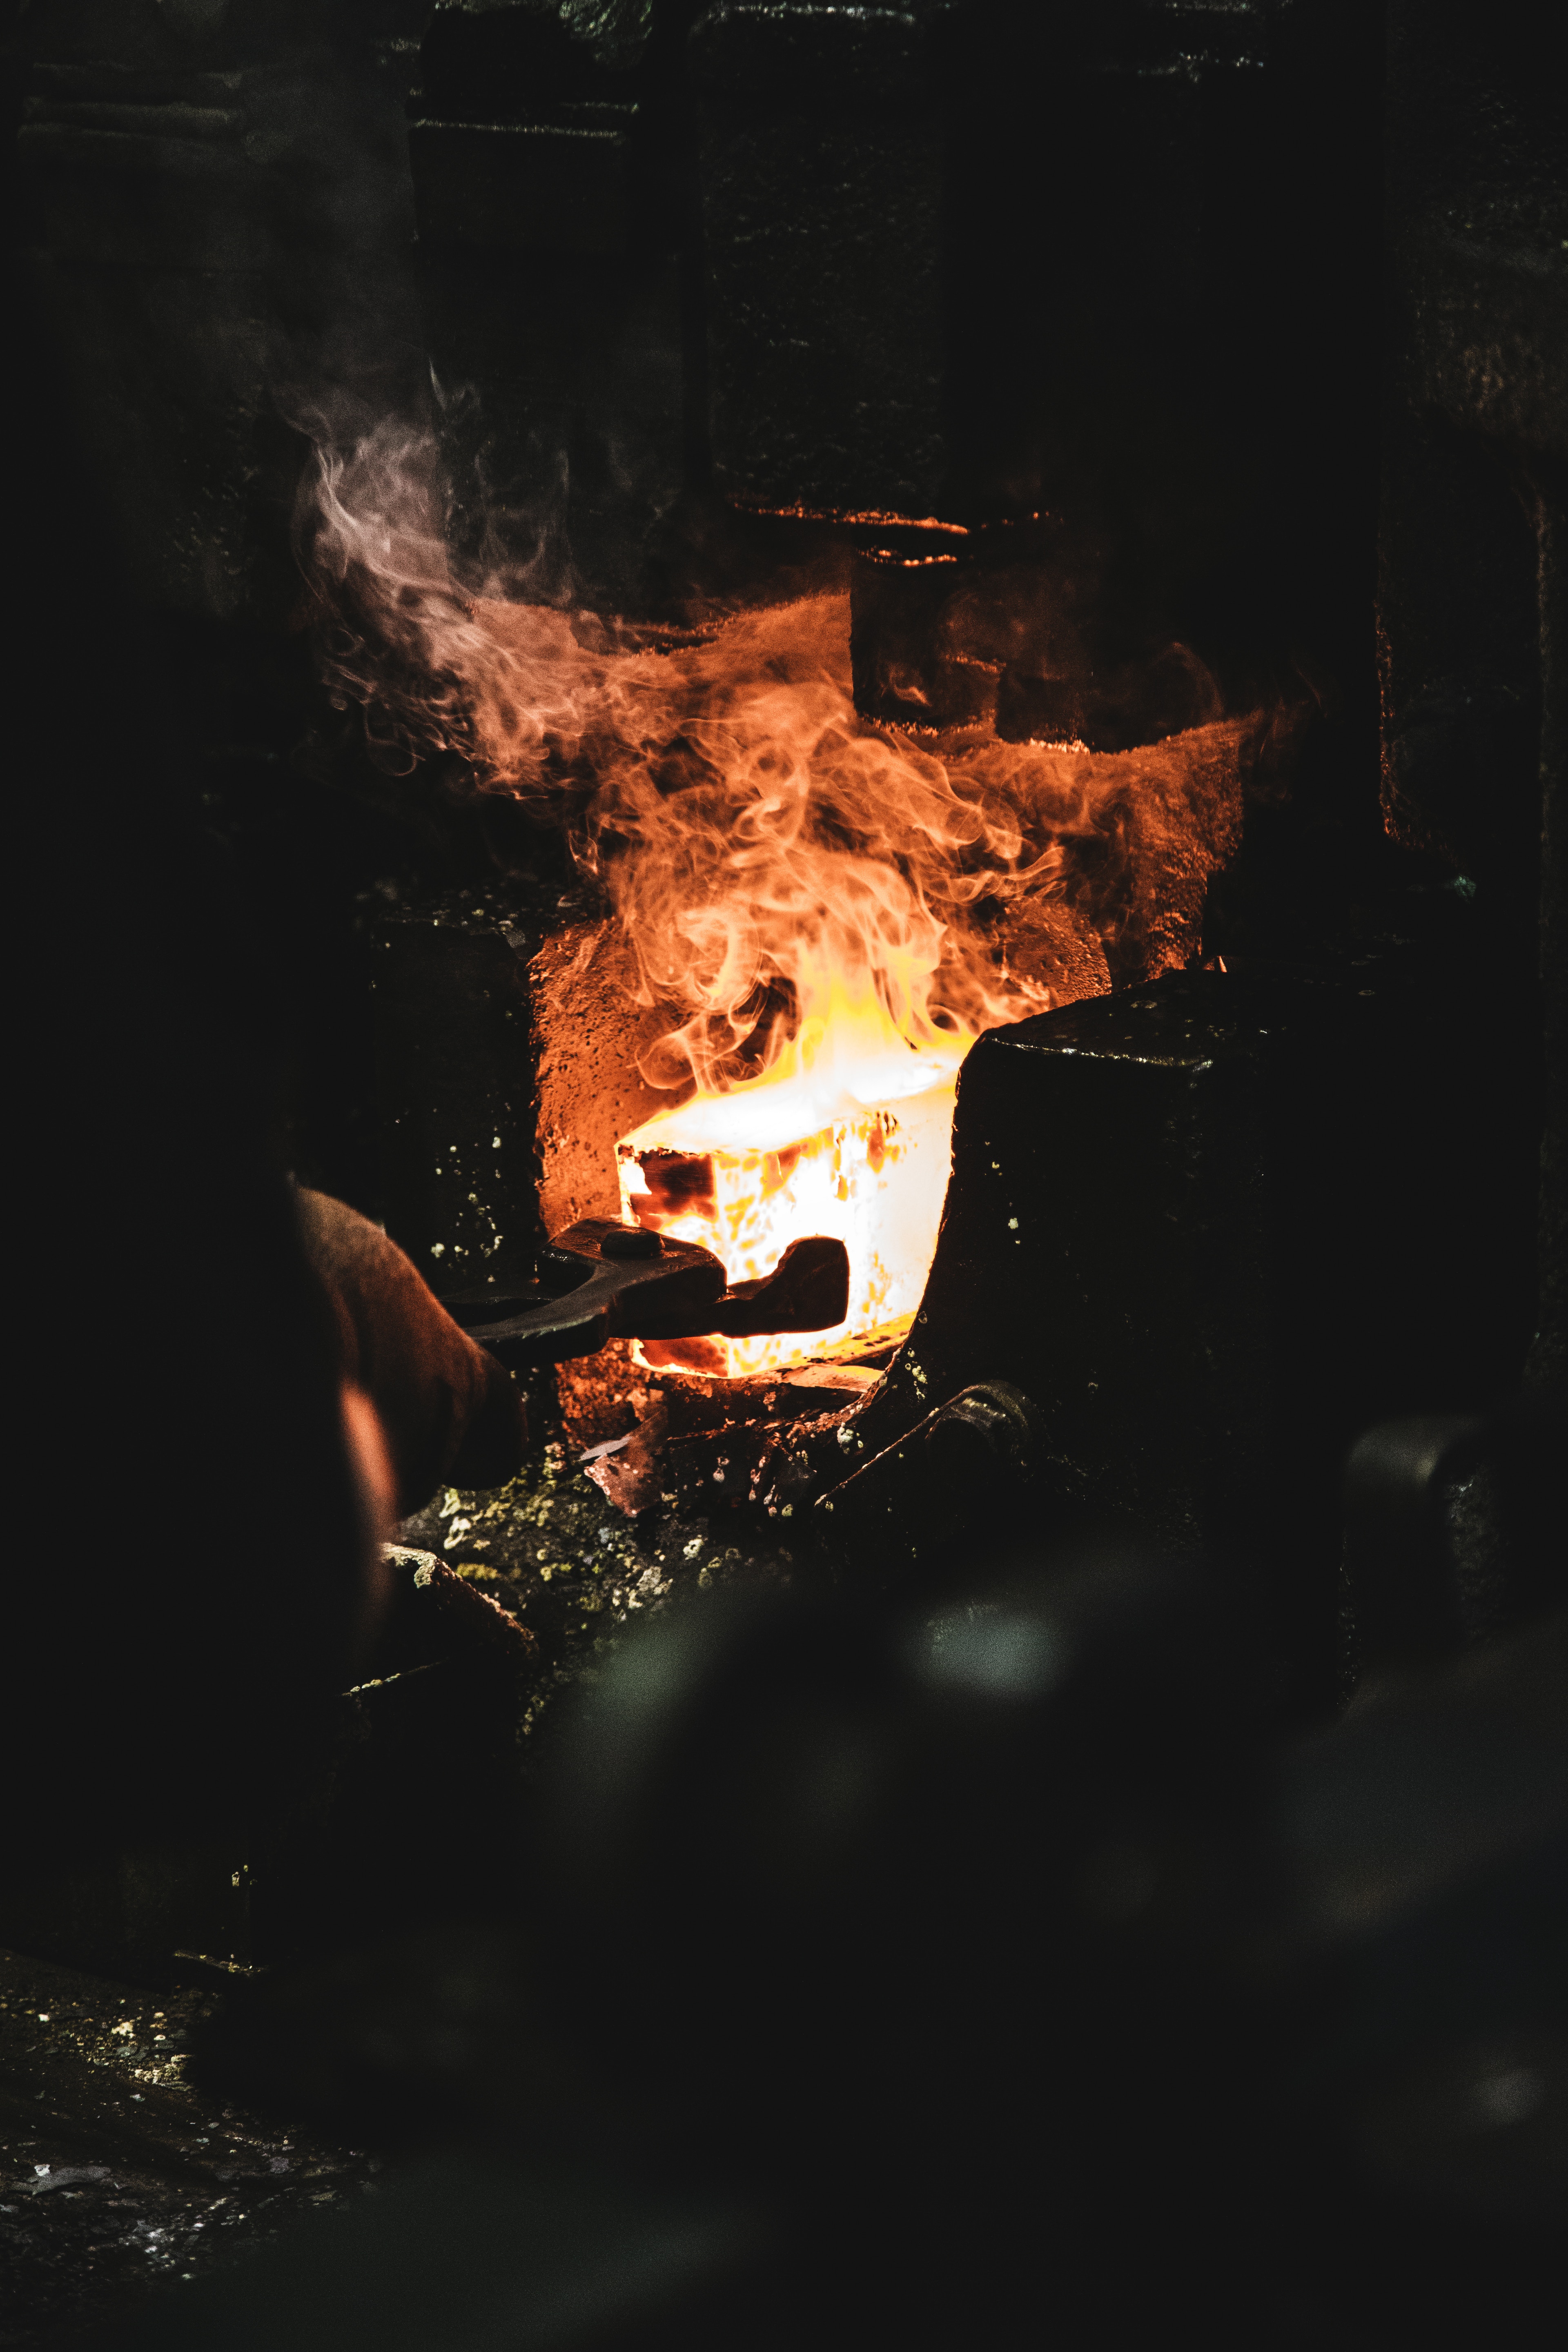 A person melting iron in a forge